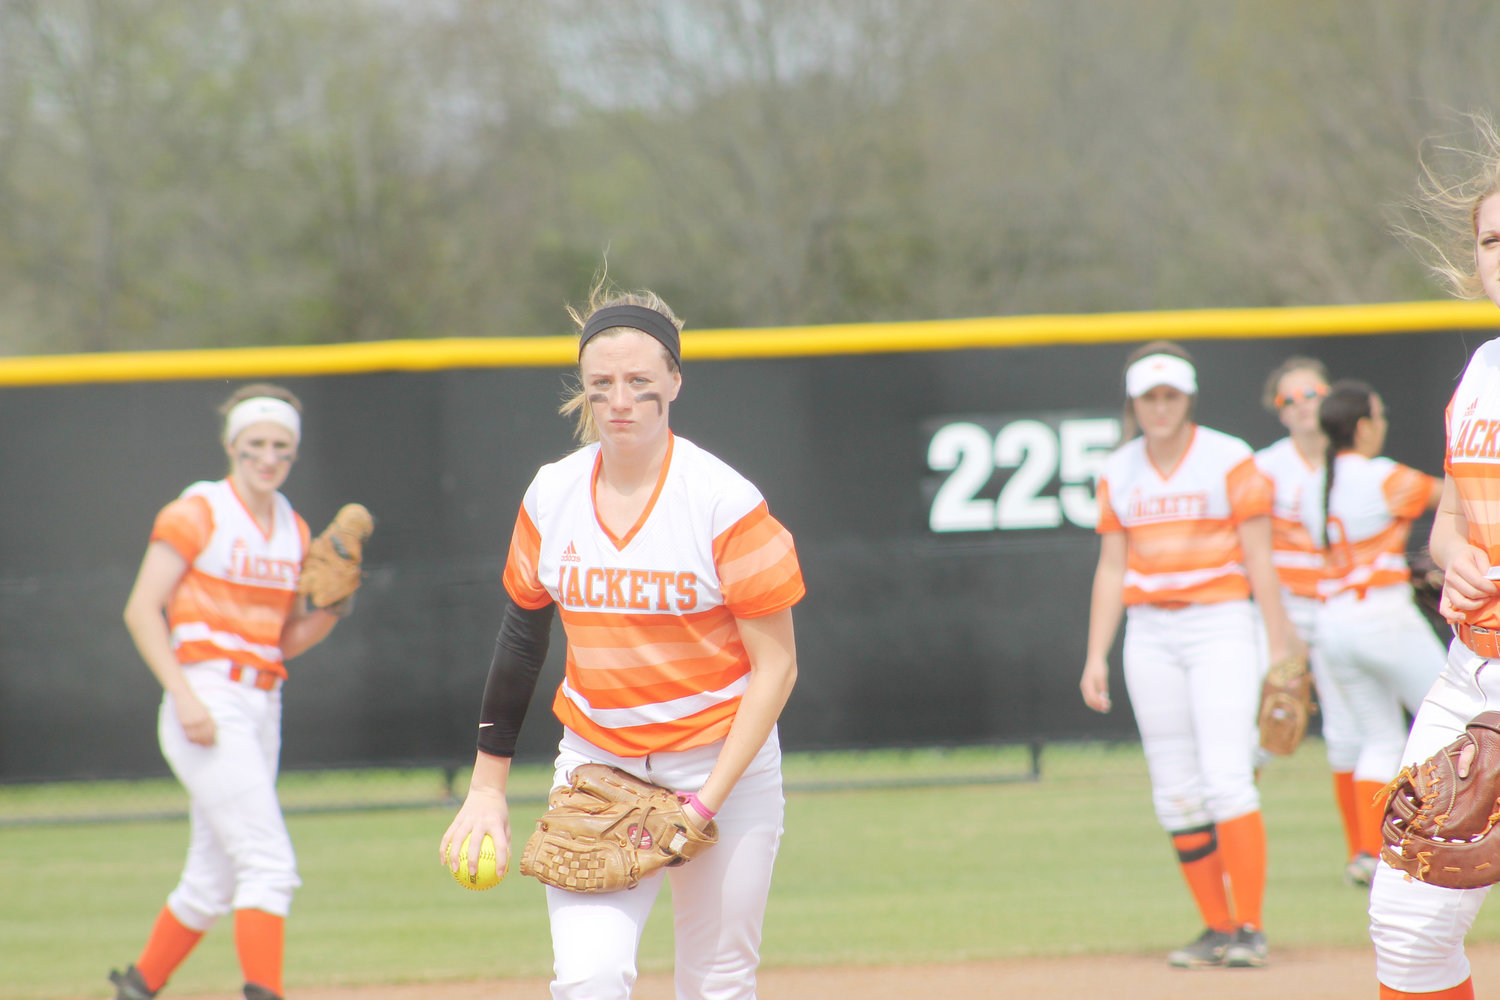 Lady Jacket Pitcher Sydnie Bell is on the mound in Mineola’s 13-4 win against Kemp Thursday afternoon in Mineola. She also pitched in Mineola’s win over Grand Saline last Tuesday. (Monitor photo by Doris Newman)